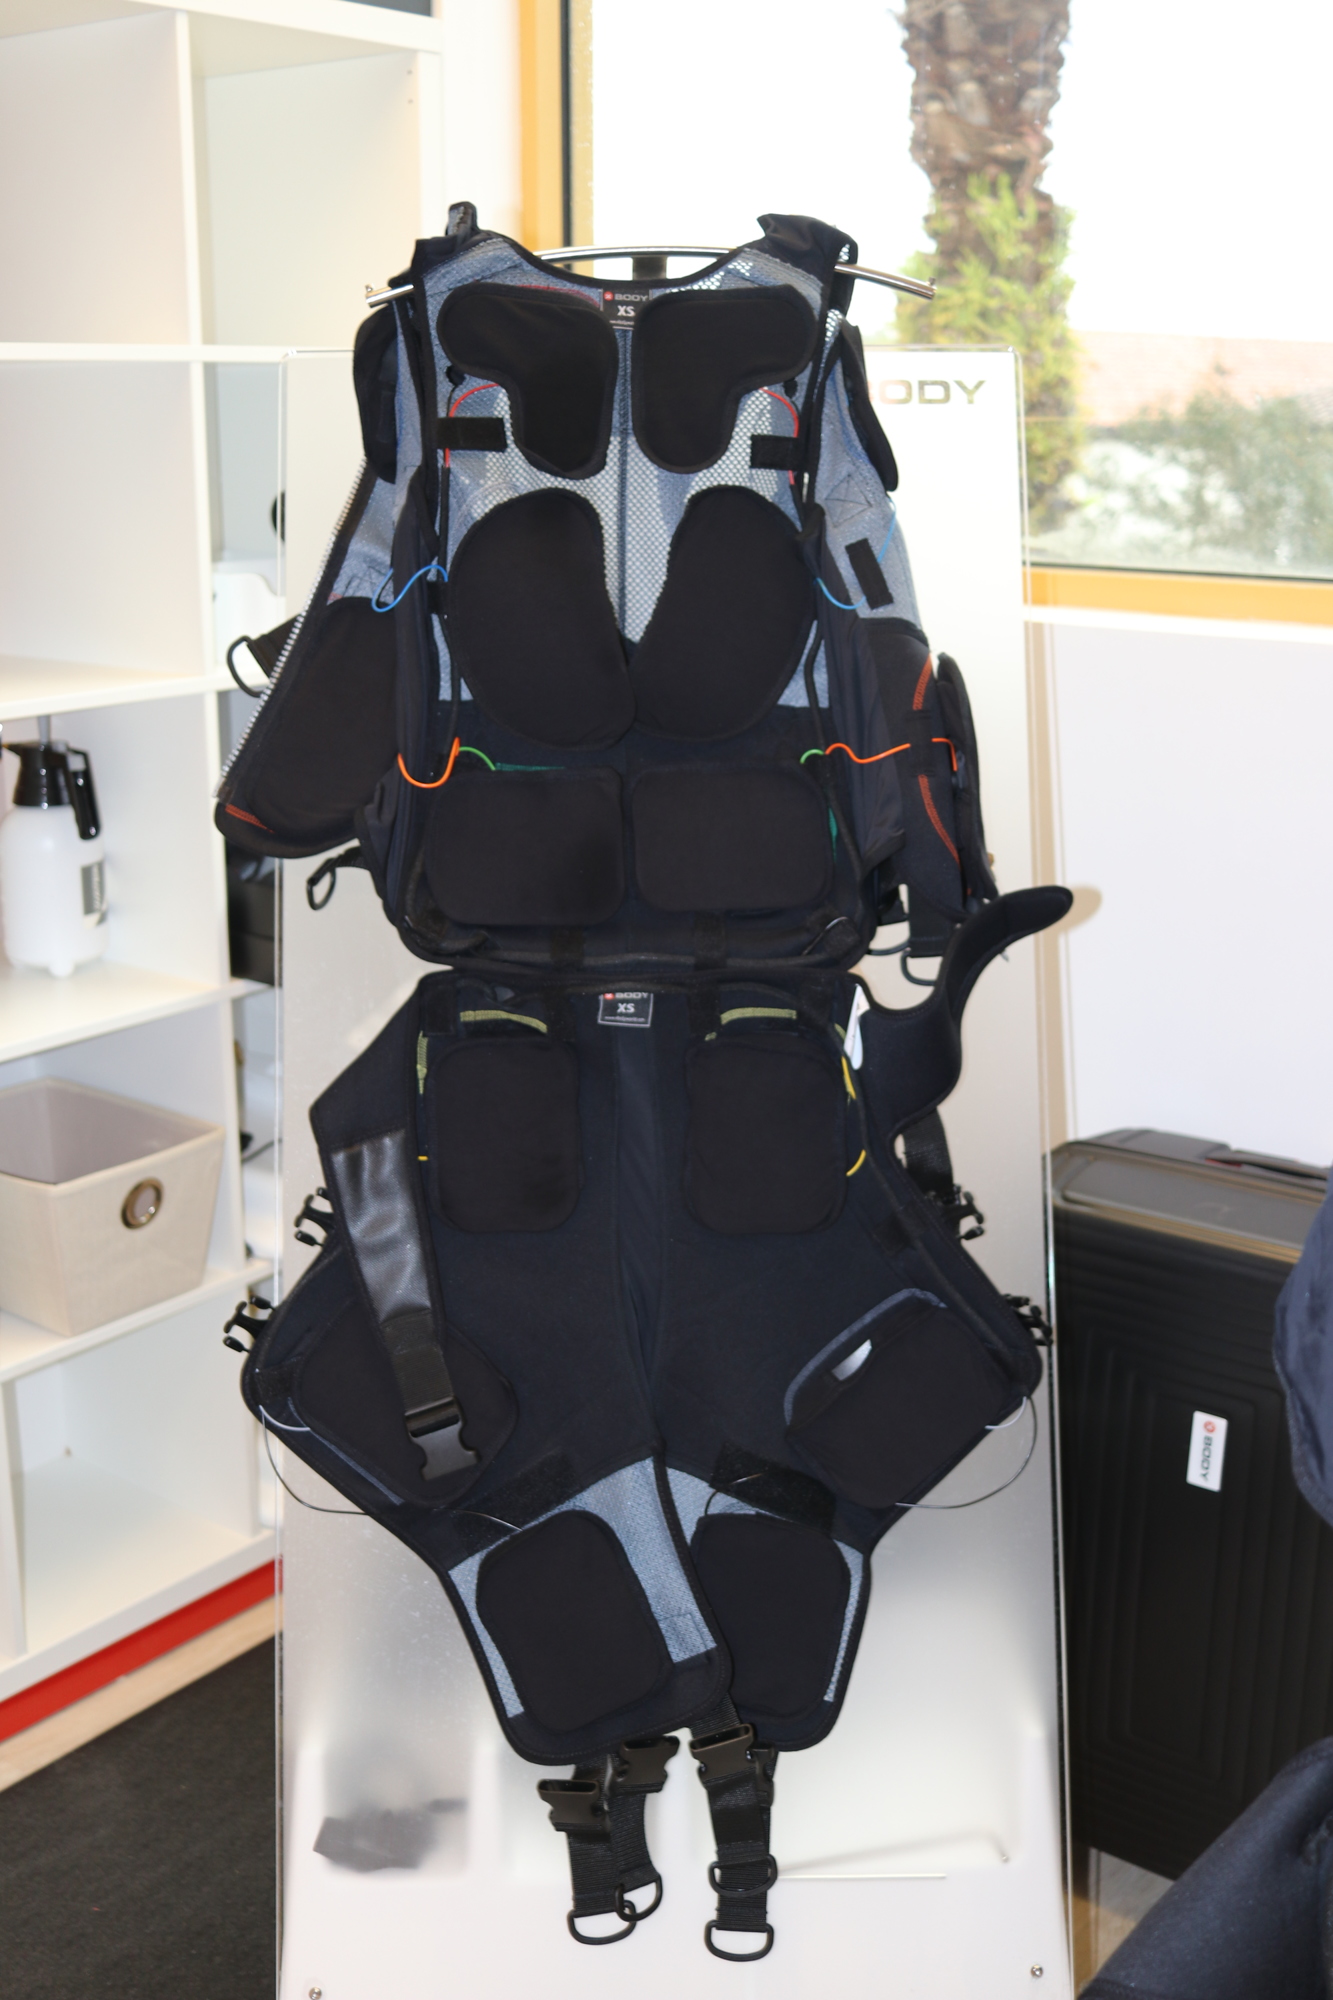 PhysioFix utilizes this body suit for its electric muscle-stimulation training. The suit is equipped with EMS technology that stimulates various muscle groups during a workout.